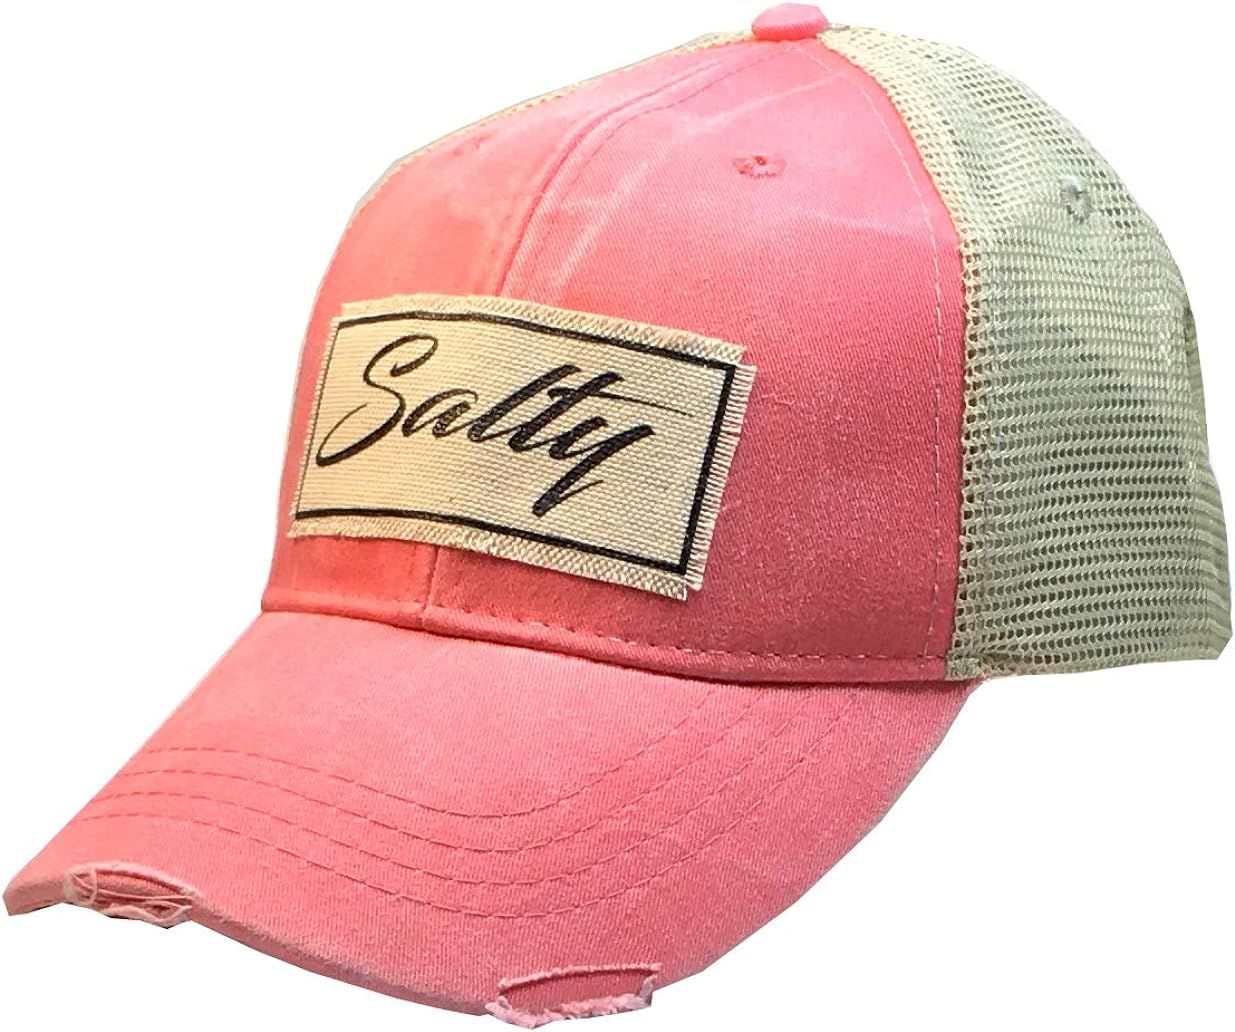 Vintage Life Funny Hats for Women and Girls, Distressed Trucker Baseball Cap with Sayings | Amazon (US)